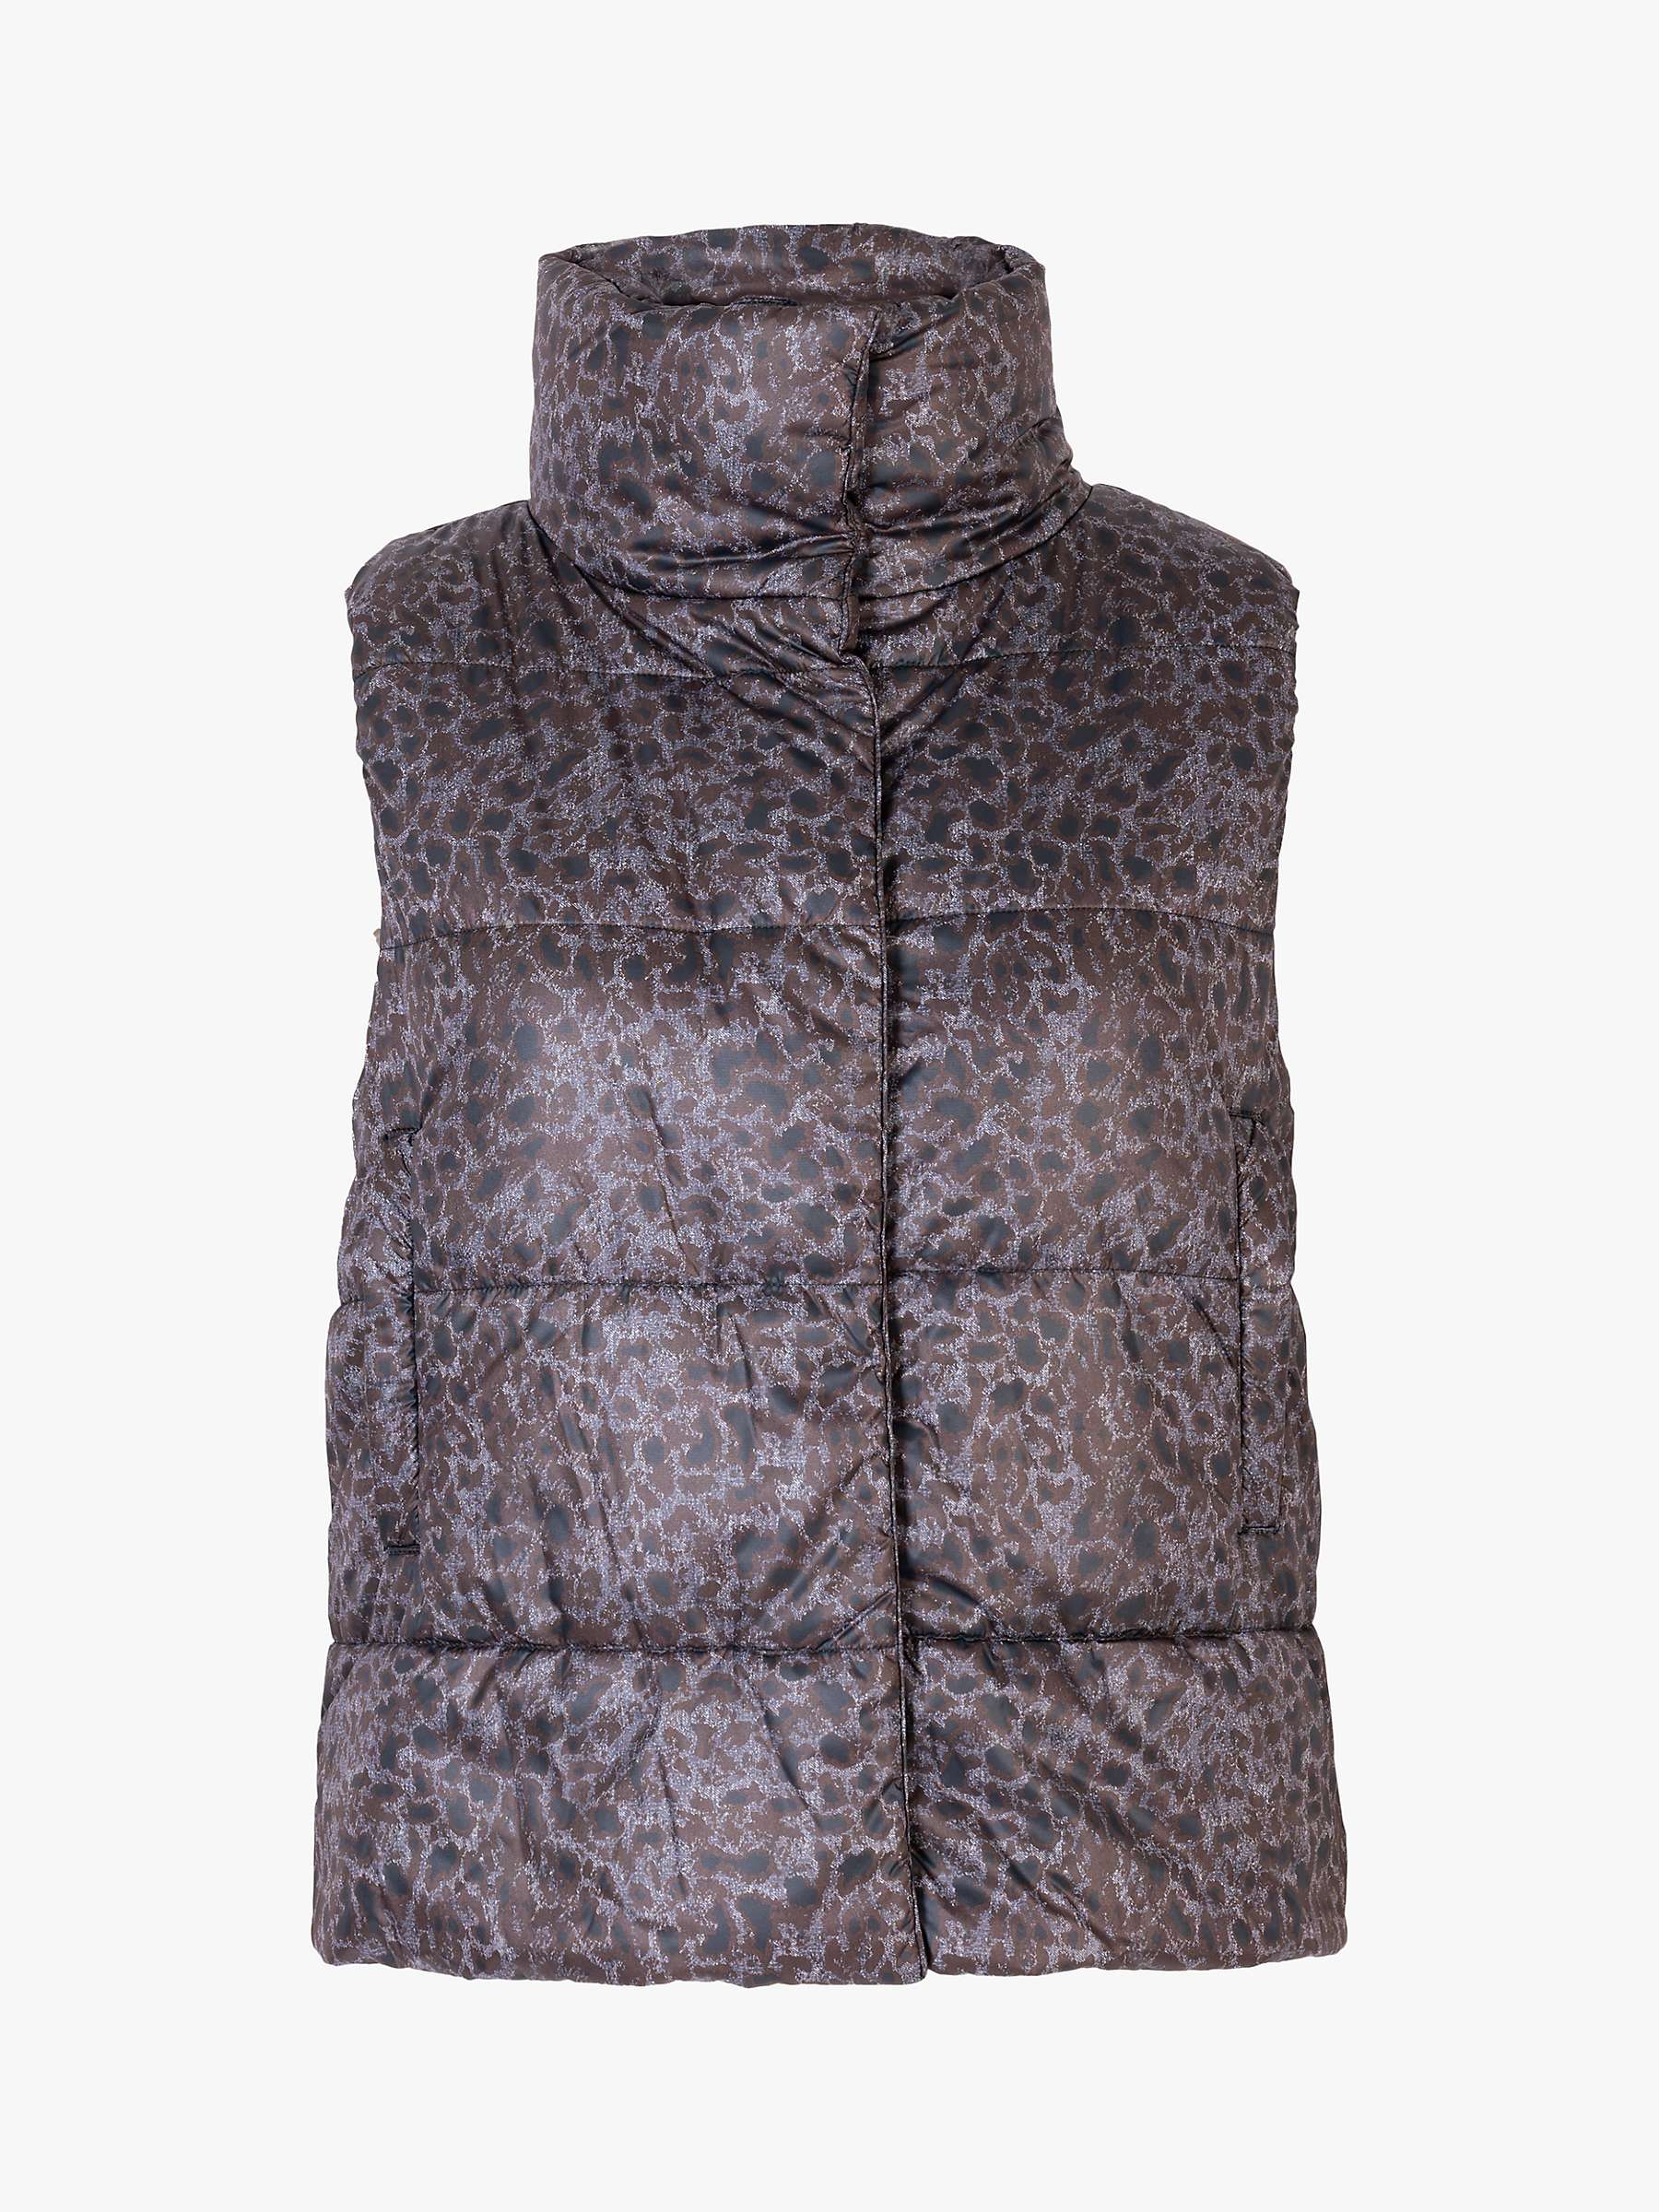 Buy chesca Quilted Animal Print Gilet, Brown/Grey Online at johnlewis.com